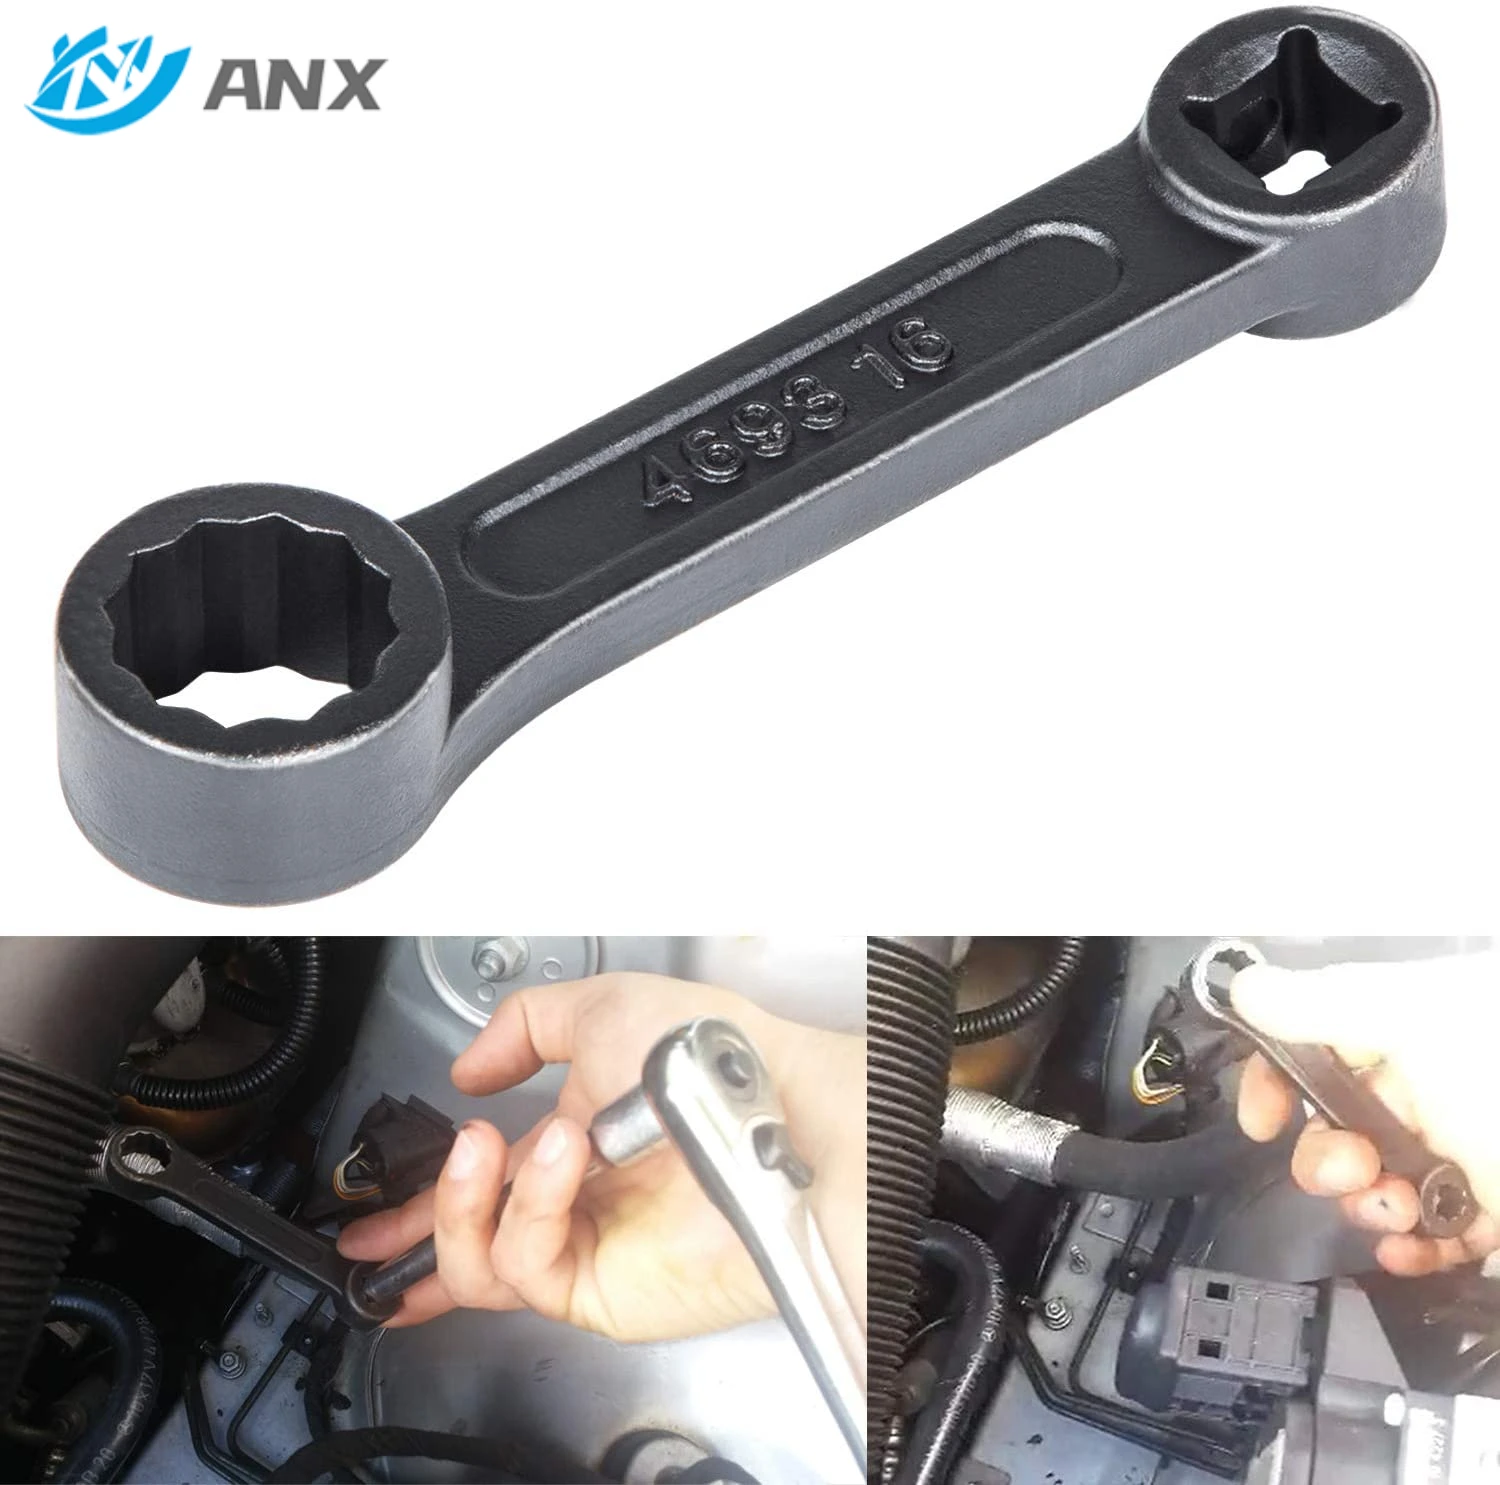 ANX Offset 16mm 4693 Engine Mount Socket Wrench for Mercedes Benz W220/ W210/W203/W221/W211/W204 rollstough pdc parking sensor for mercedes benz w220 w211 w251 w203 oem 0045428718